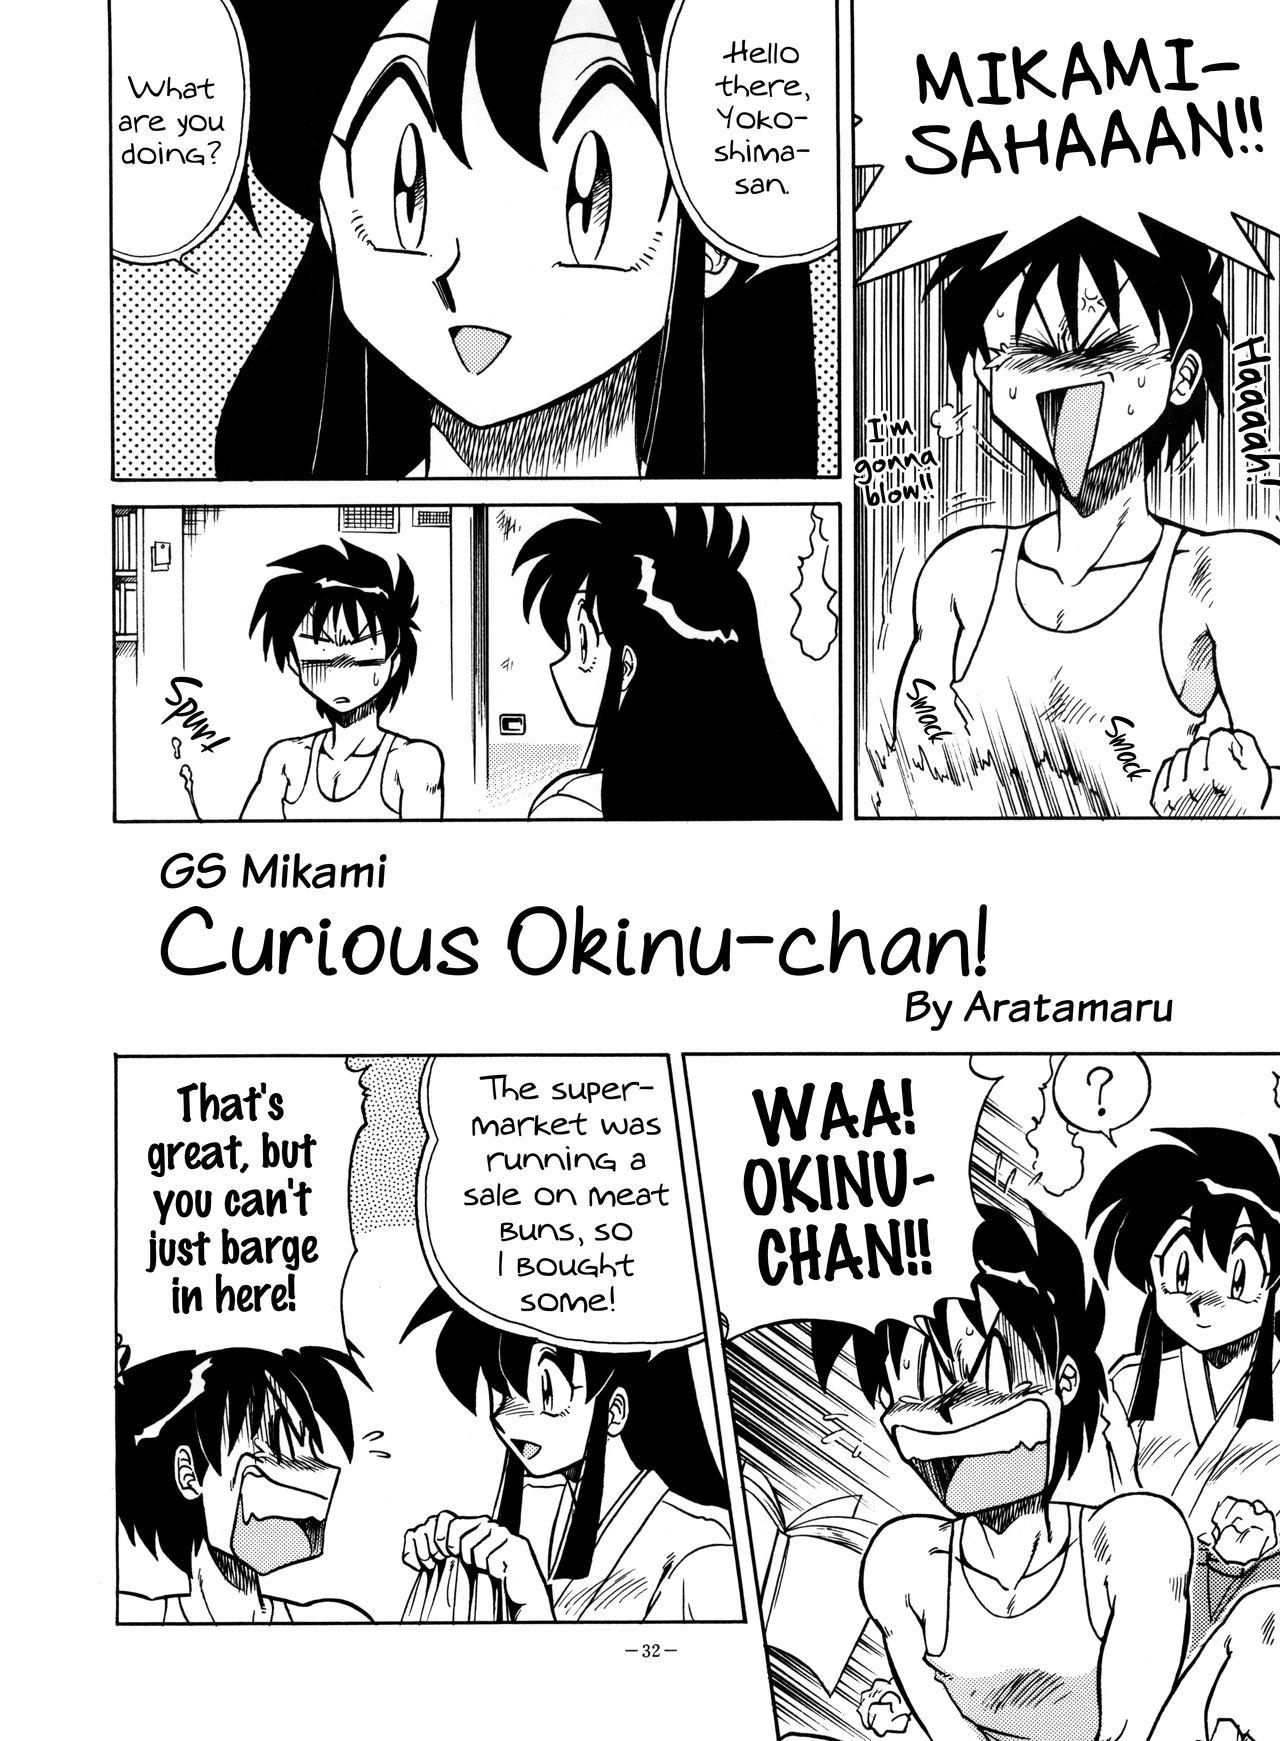 Innocent Curious Okinu-chan! - Ghost sweeper mikami Gay Bang - Page 2